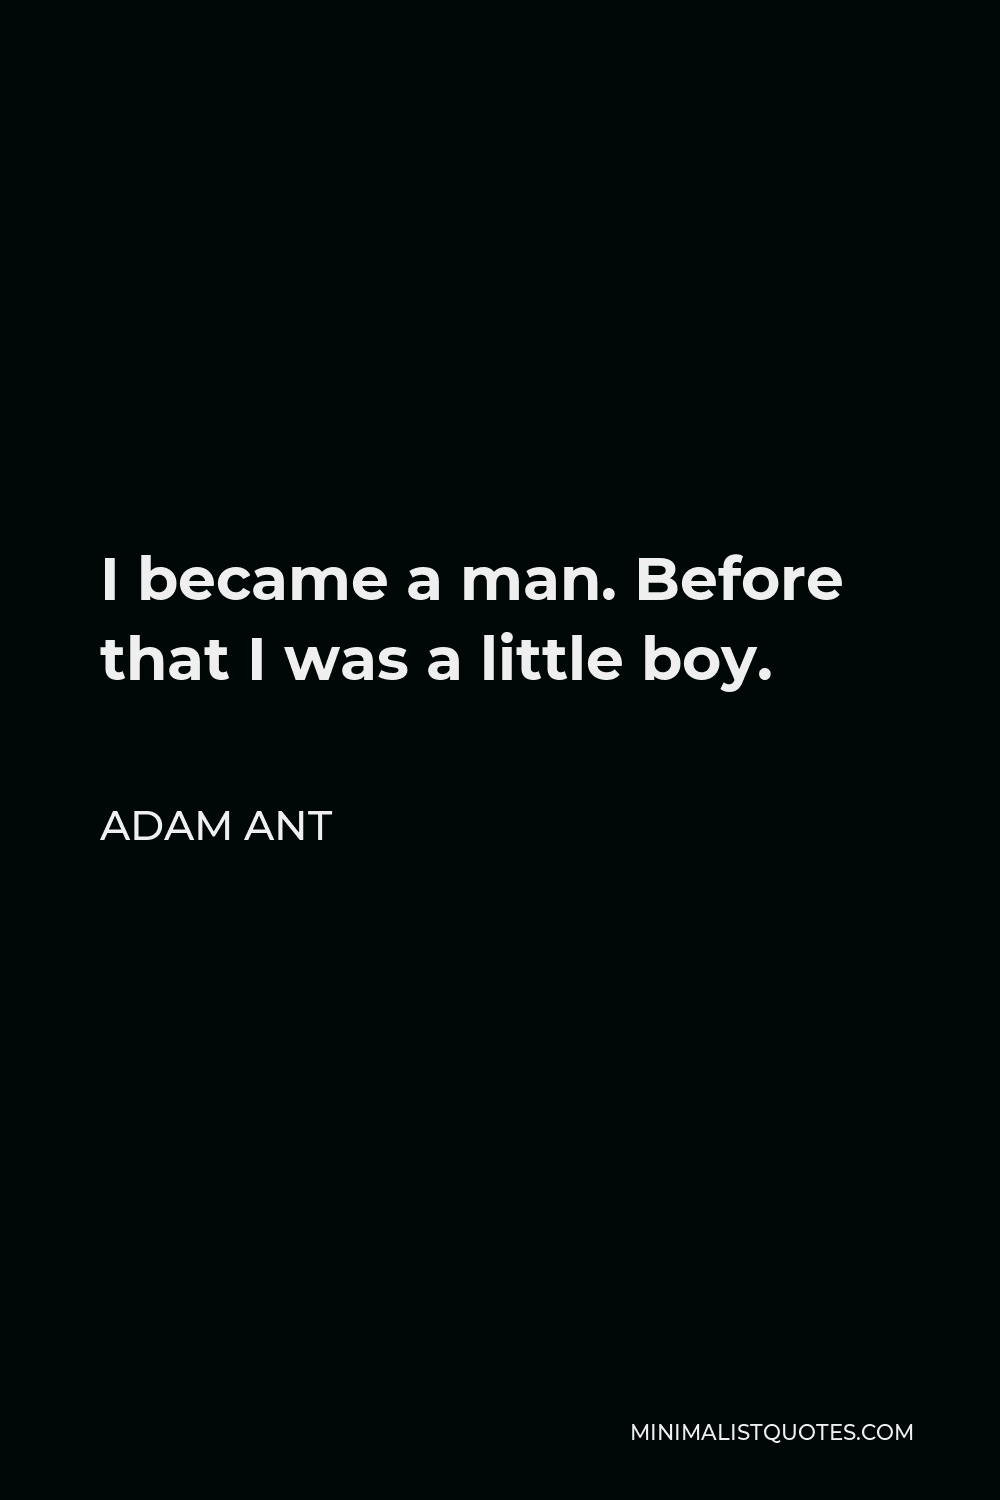 Adam Ant Quote - I became a man. Before that I was a little boy.